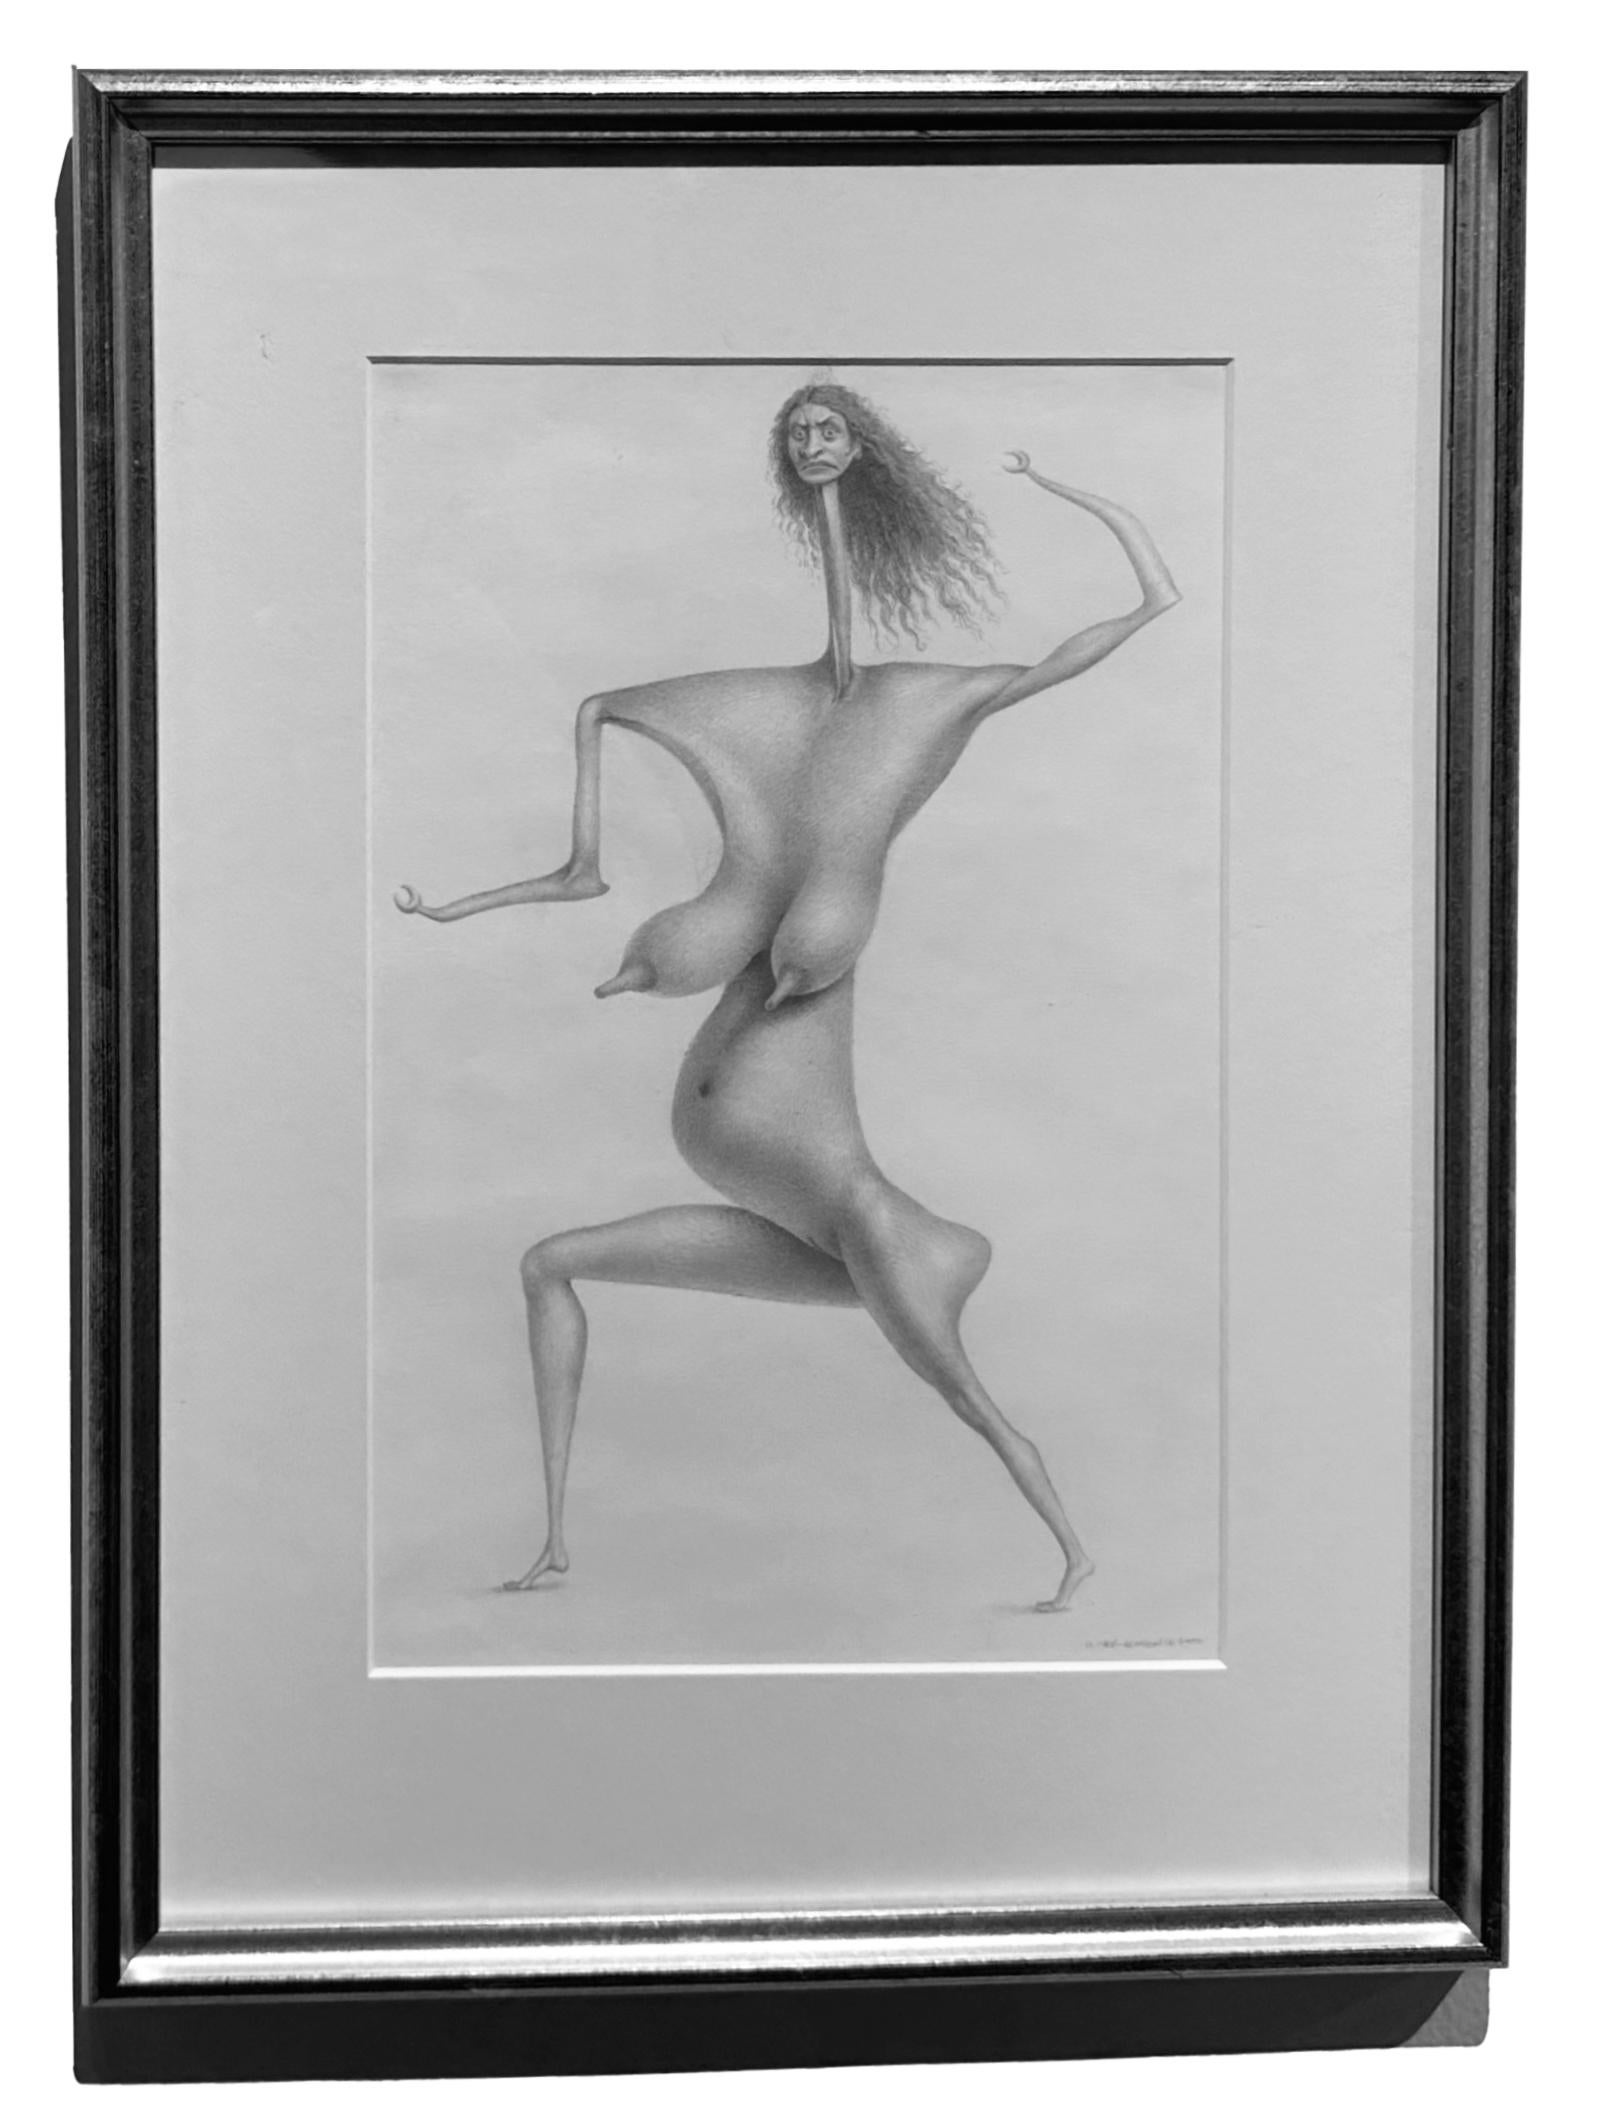 TnT - Surreal Nude Figure, Fine Point Graphite Drawiing, Matted and Framed - Print by Oliver Hazard Benson